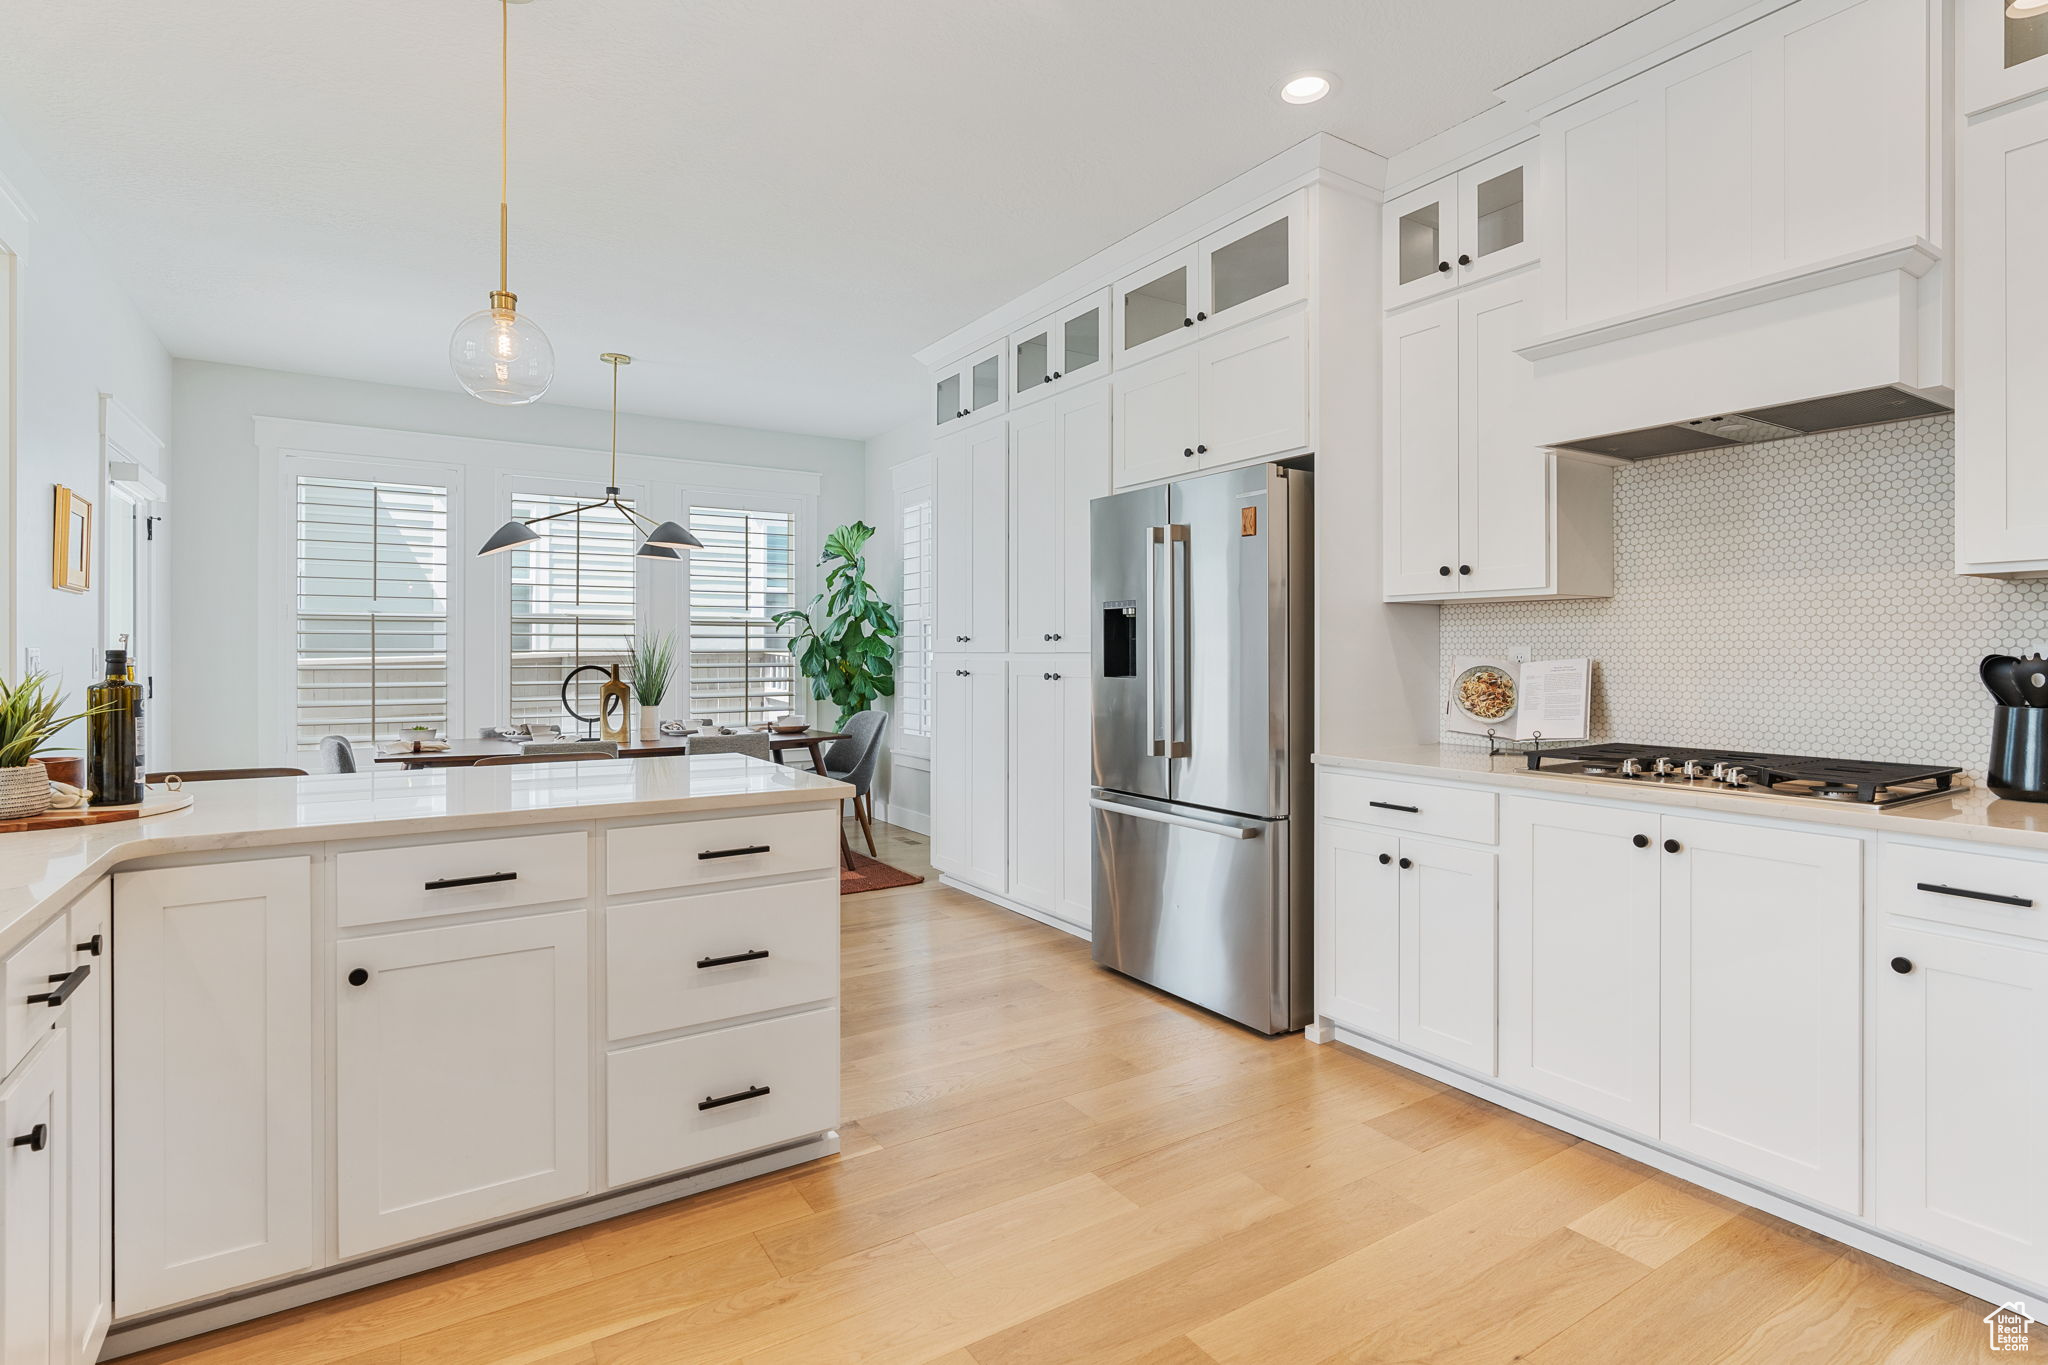 Kitchen featuring contemporary light fixtures, light oak hardwood, white cabinetry, backsplash, double oven, gas cooktop, vent hood, and stainless steel appliances.